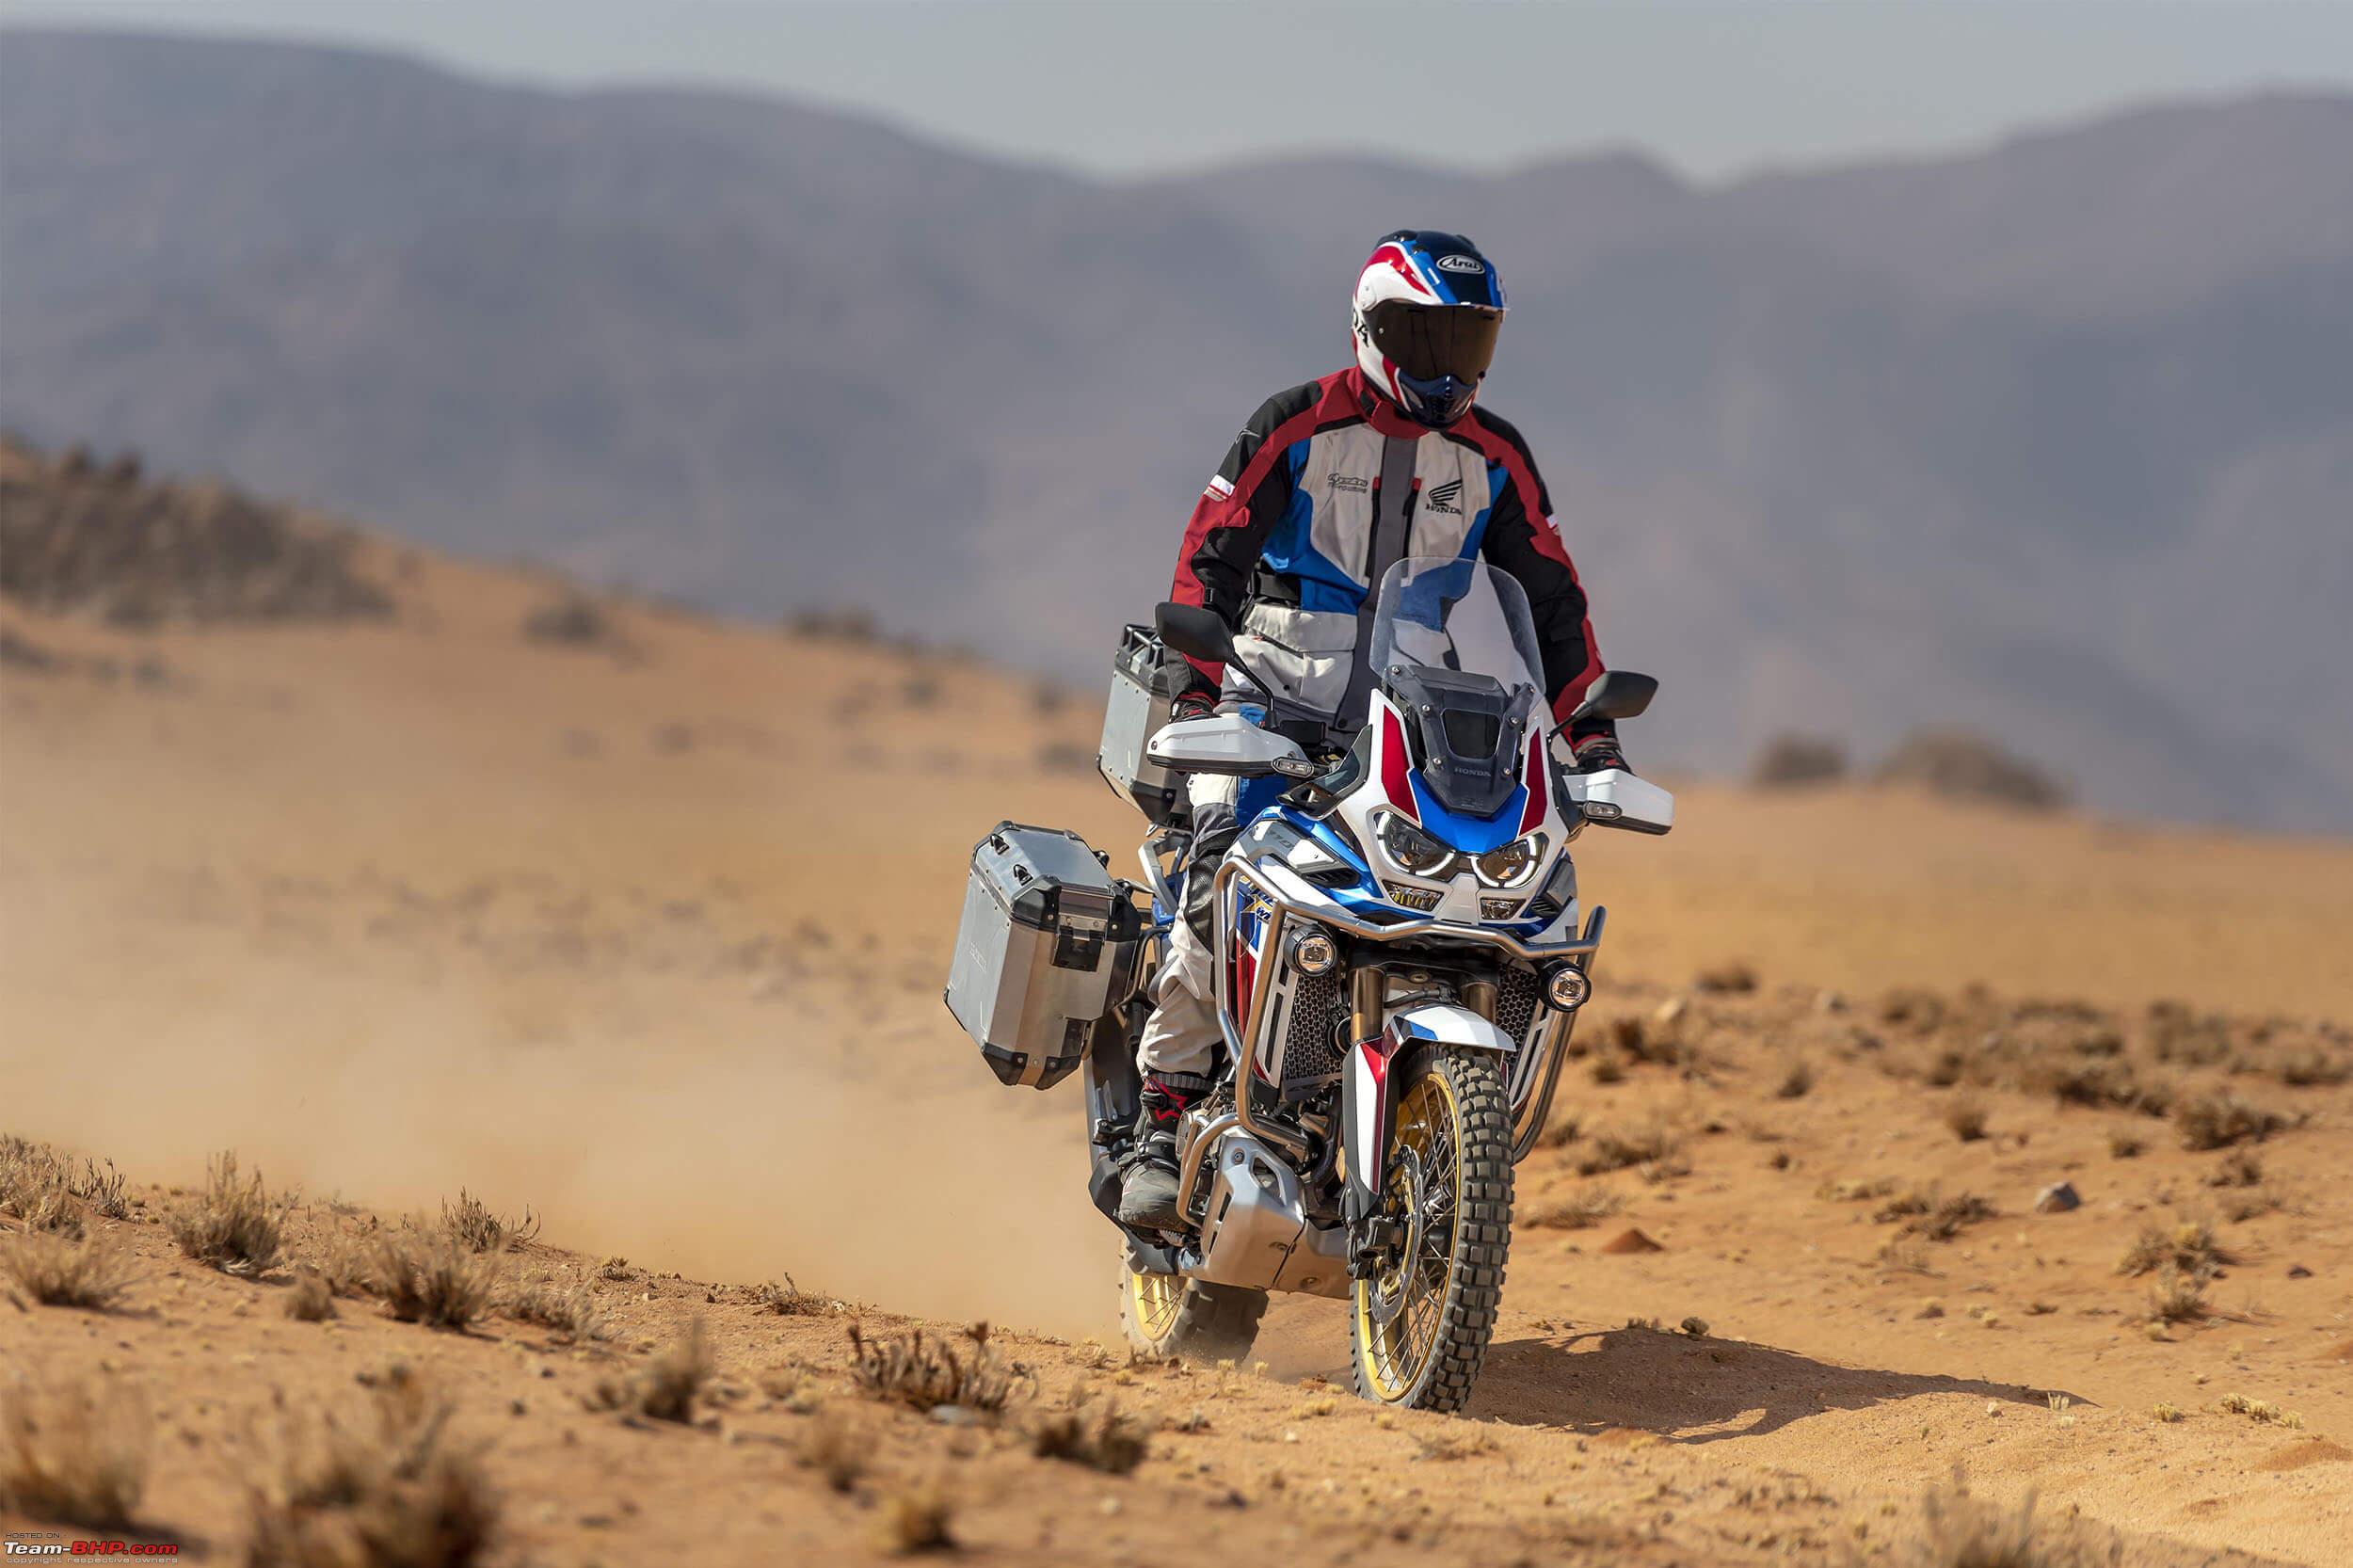 Honda Africa Twin Adventure Sports at Rs. 16 lakh - Page 4 - Team-BHP